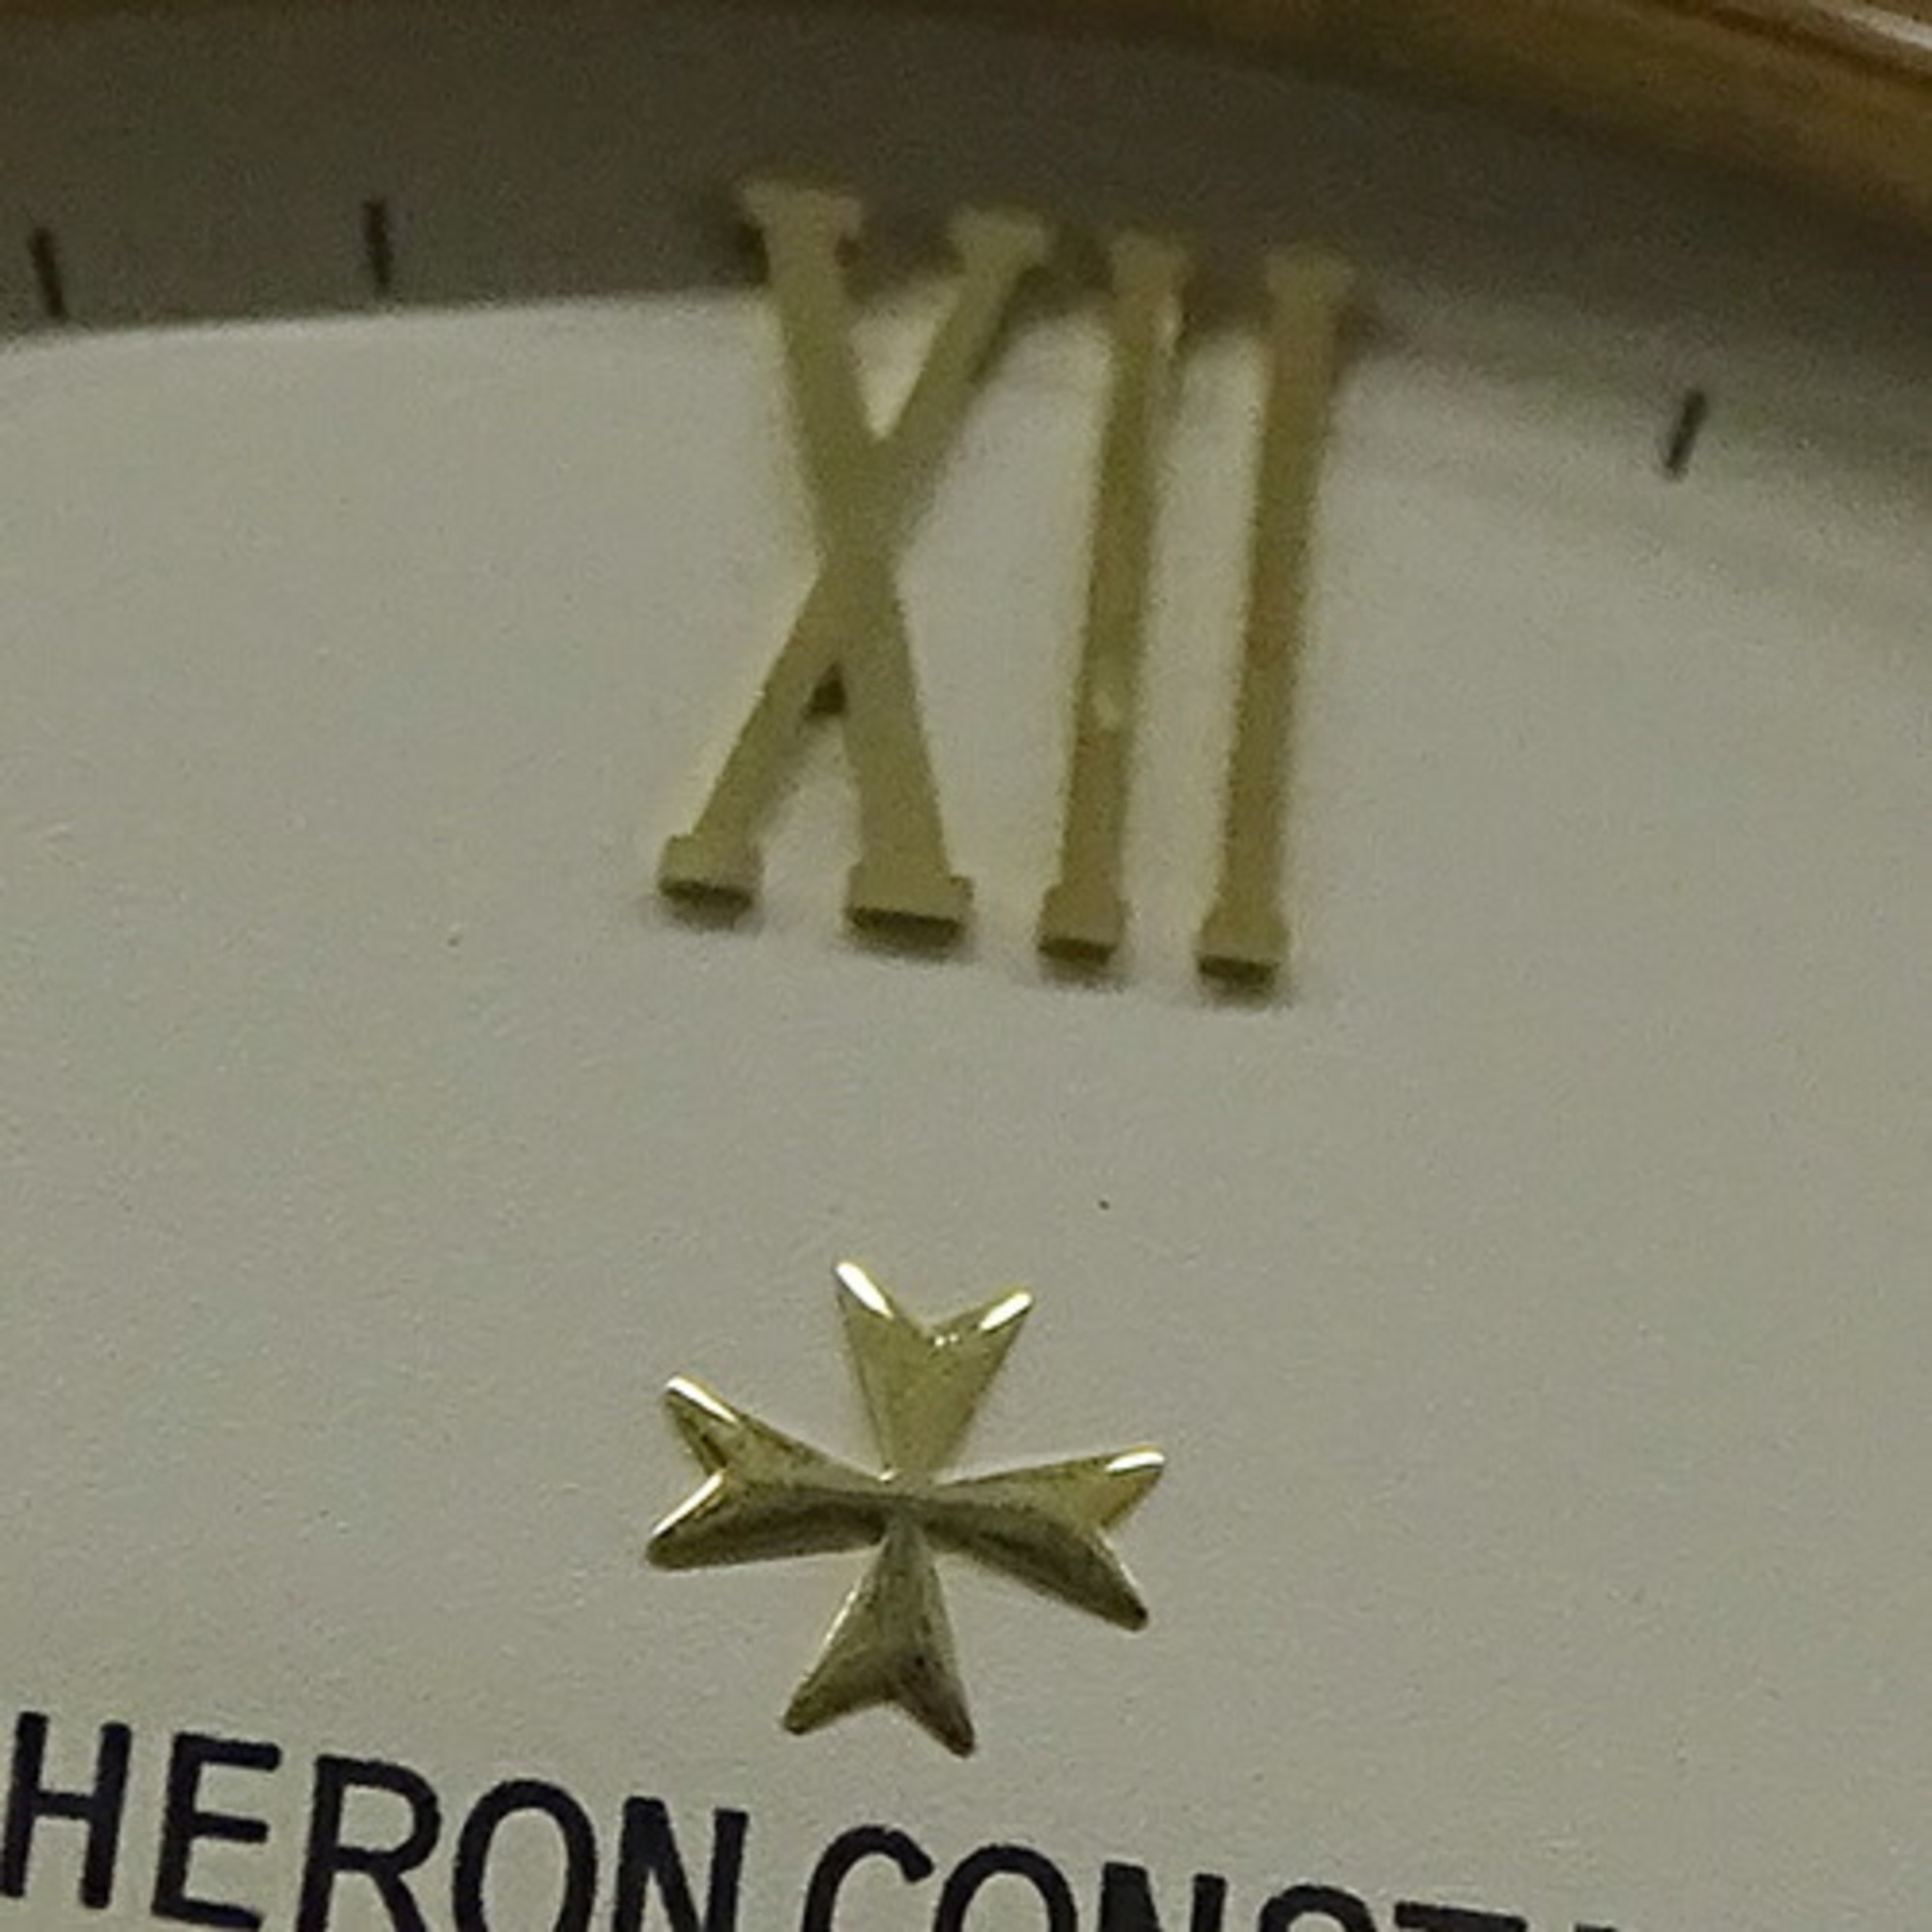 Vacheron Constantin Chambellan 43039 Men's Watch, Limited to 200 pieces worldwide, Automatic, AT 750YG, Leather, Polished